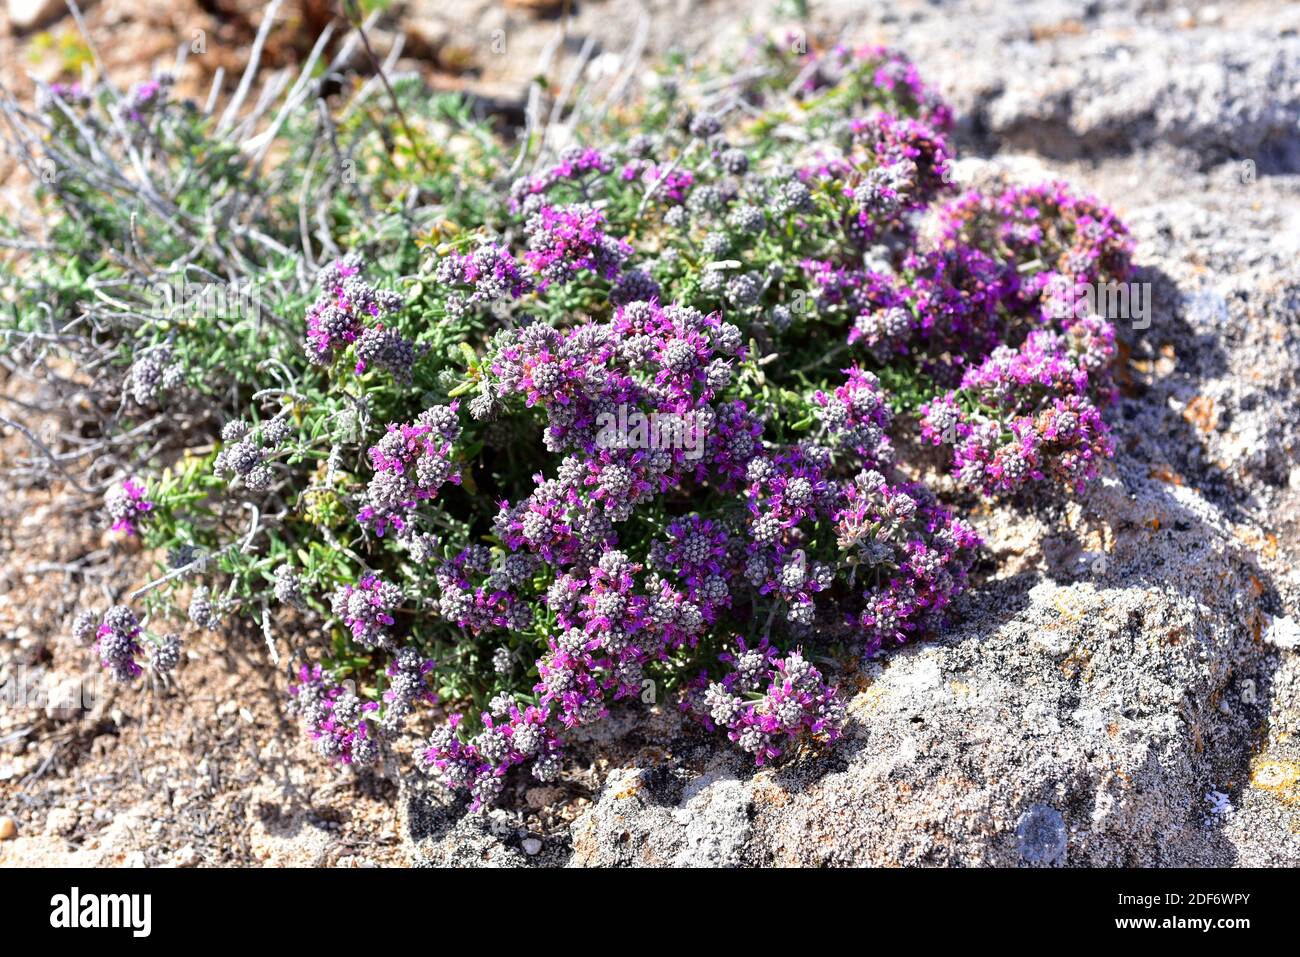 Tomillo blanco or tomillo macho (Teucrium capitatum) is a perennial subshrub native to Meditarranean Basin and western Asia. This photo was taken in Stock Photo